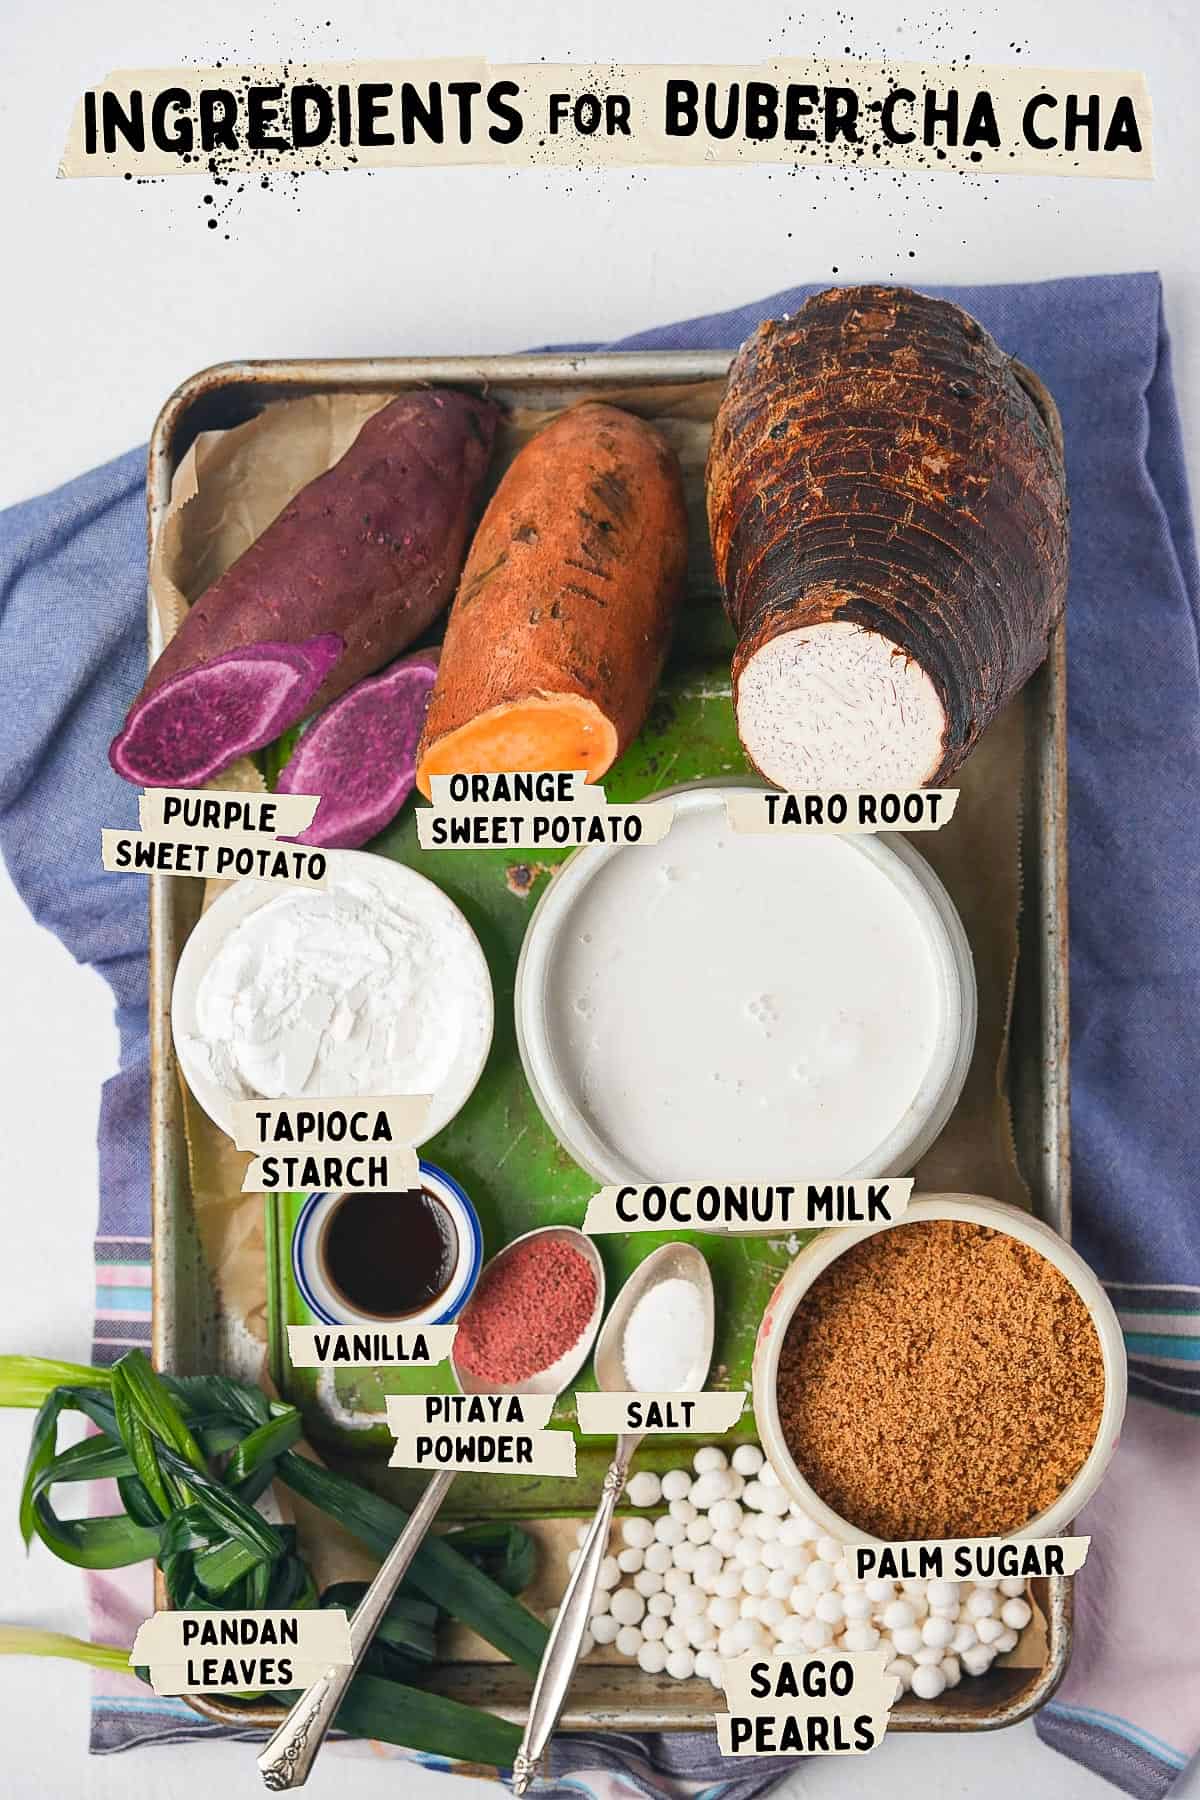 A tray with ingredients for making buber cha cha.